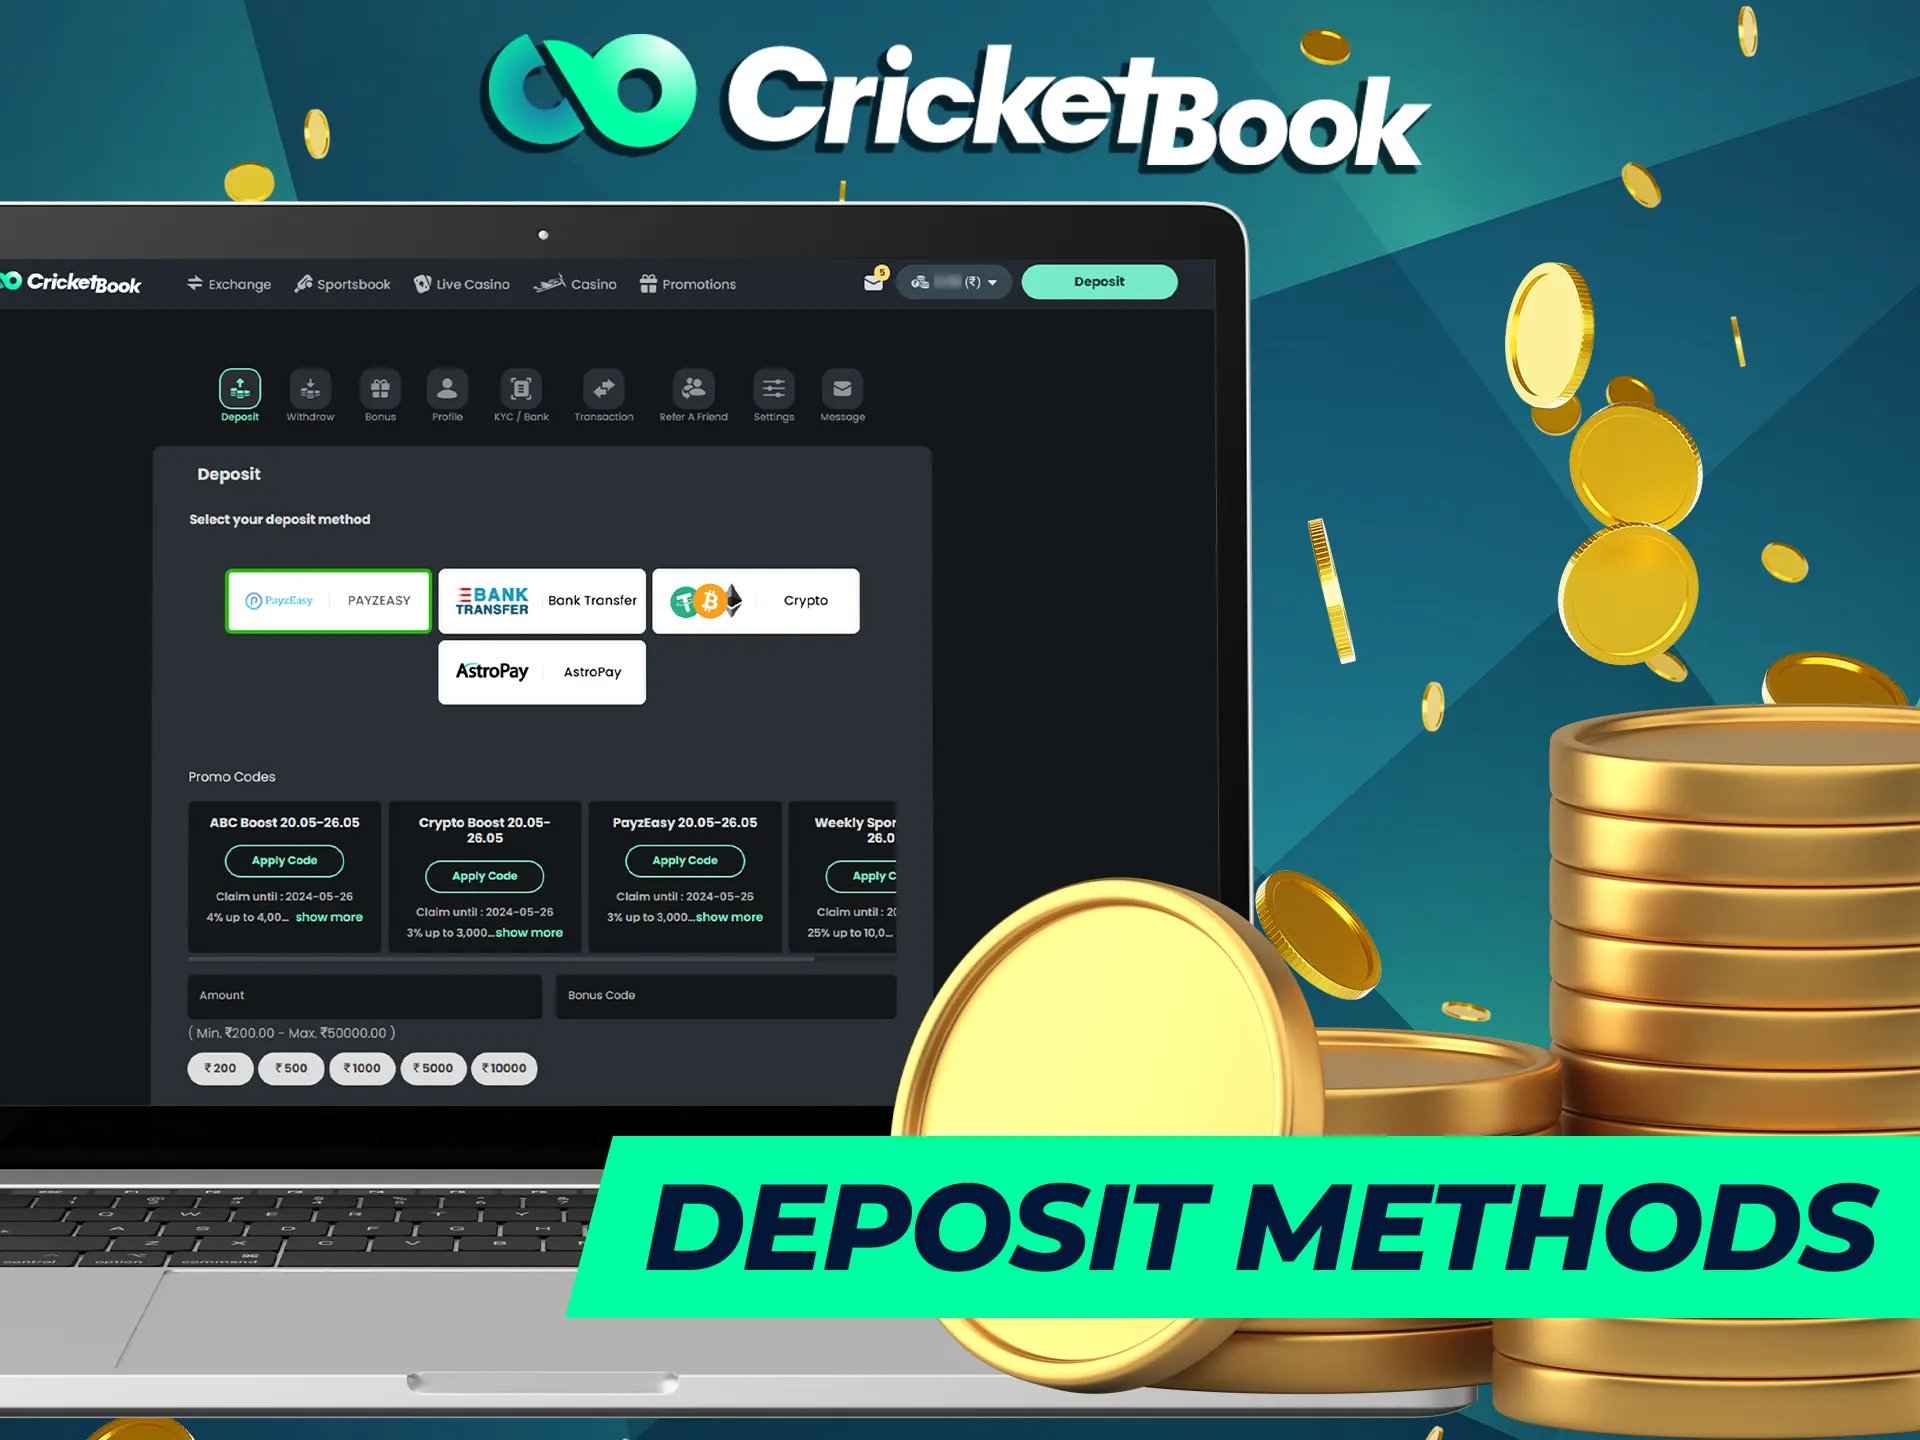 Explore the popular payment methods at CricketBook.